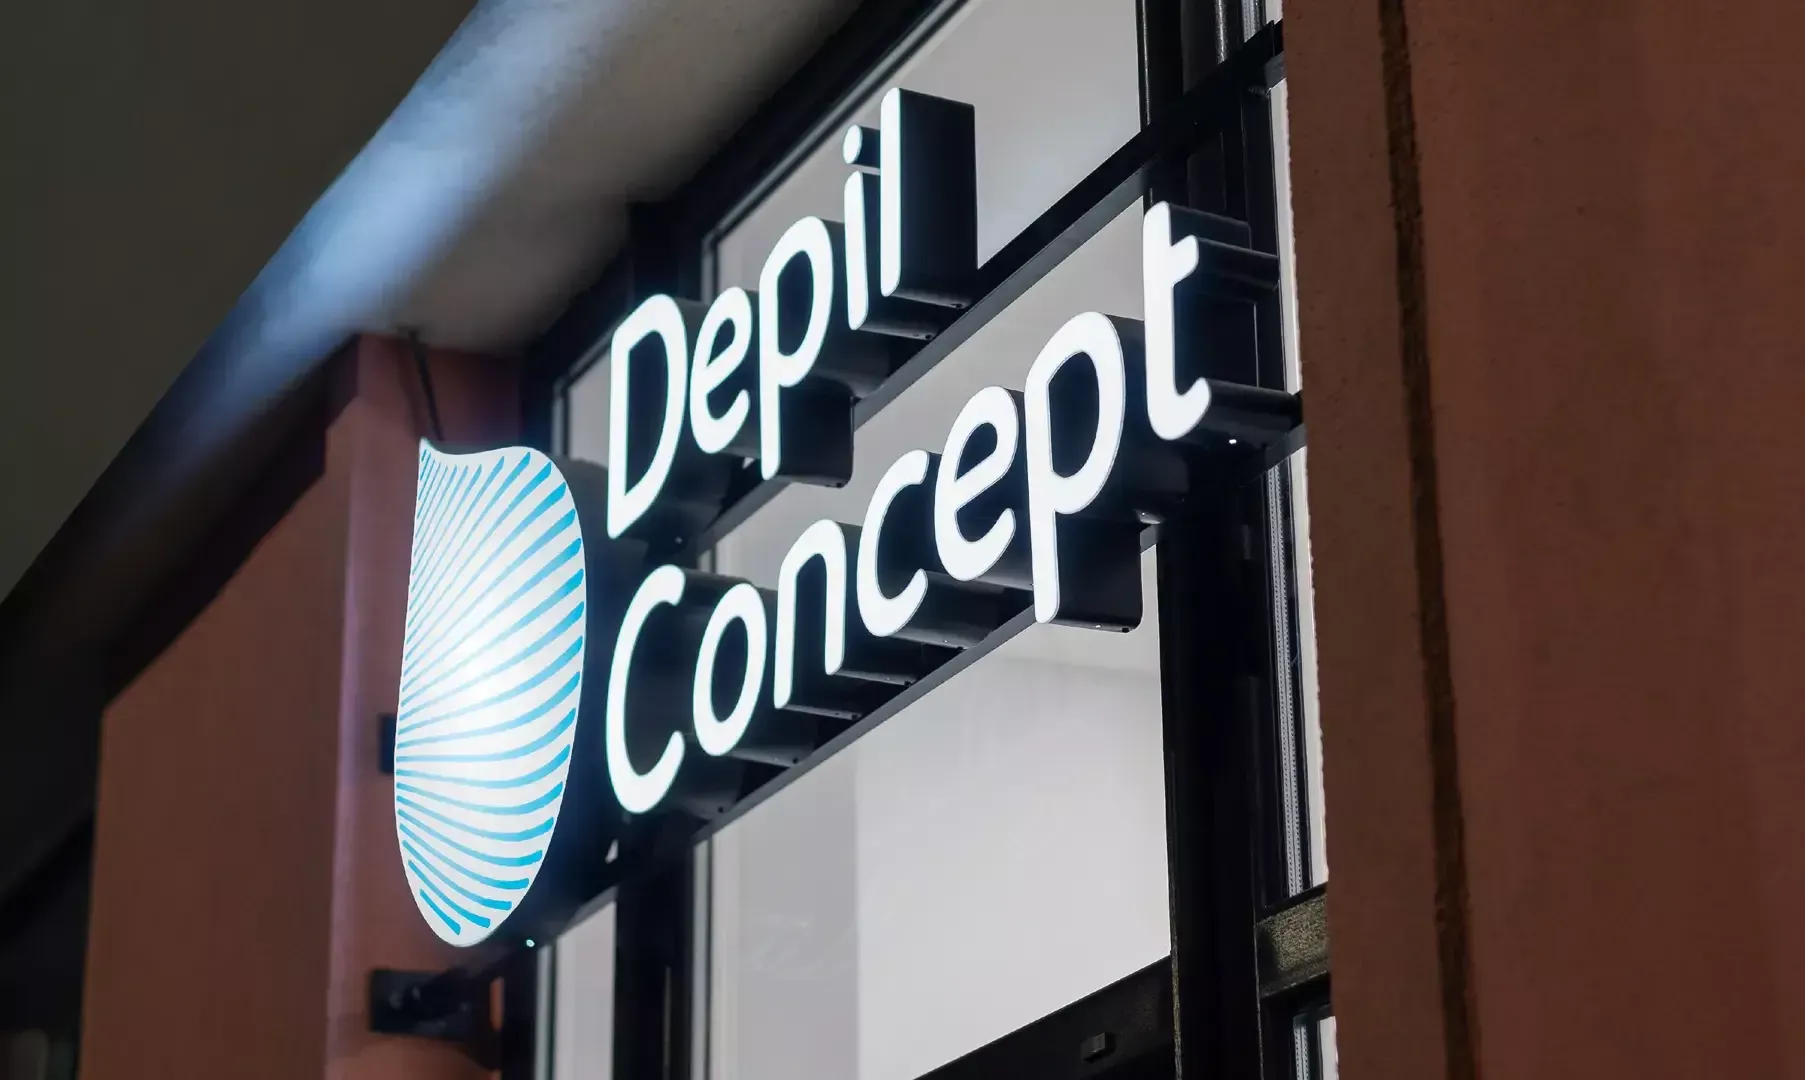 LED Illuminated Letters by Depil Concept - Depil Concept's illuminated LED outdoor letters